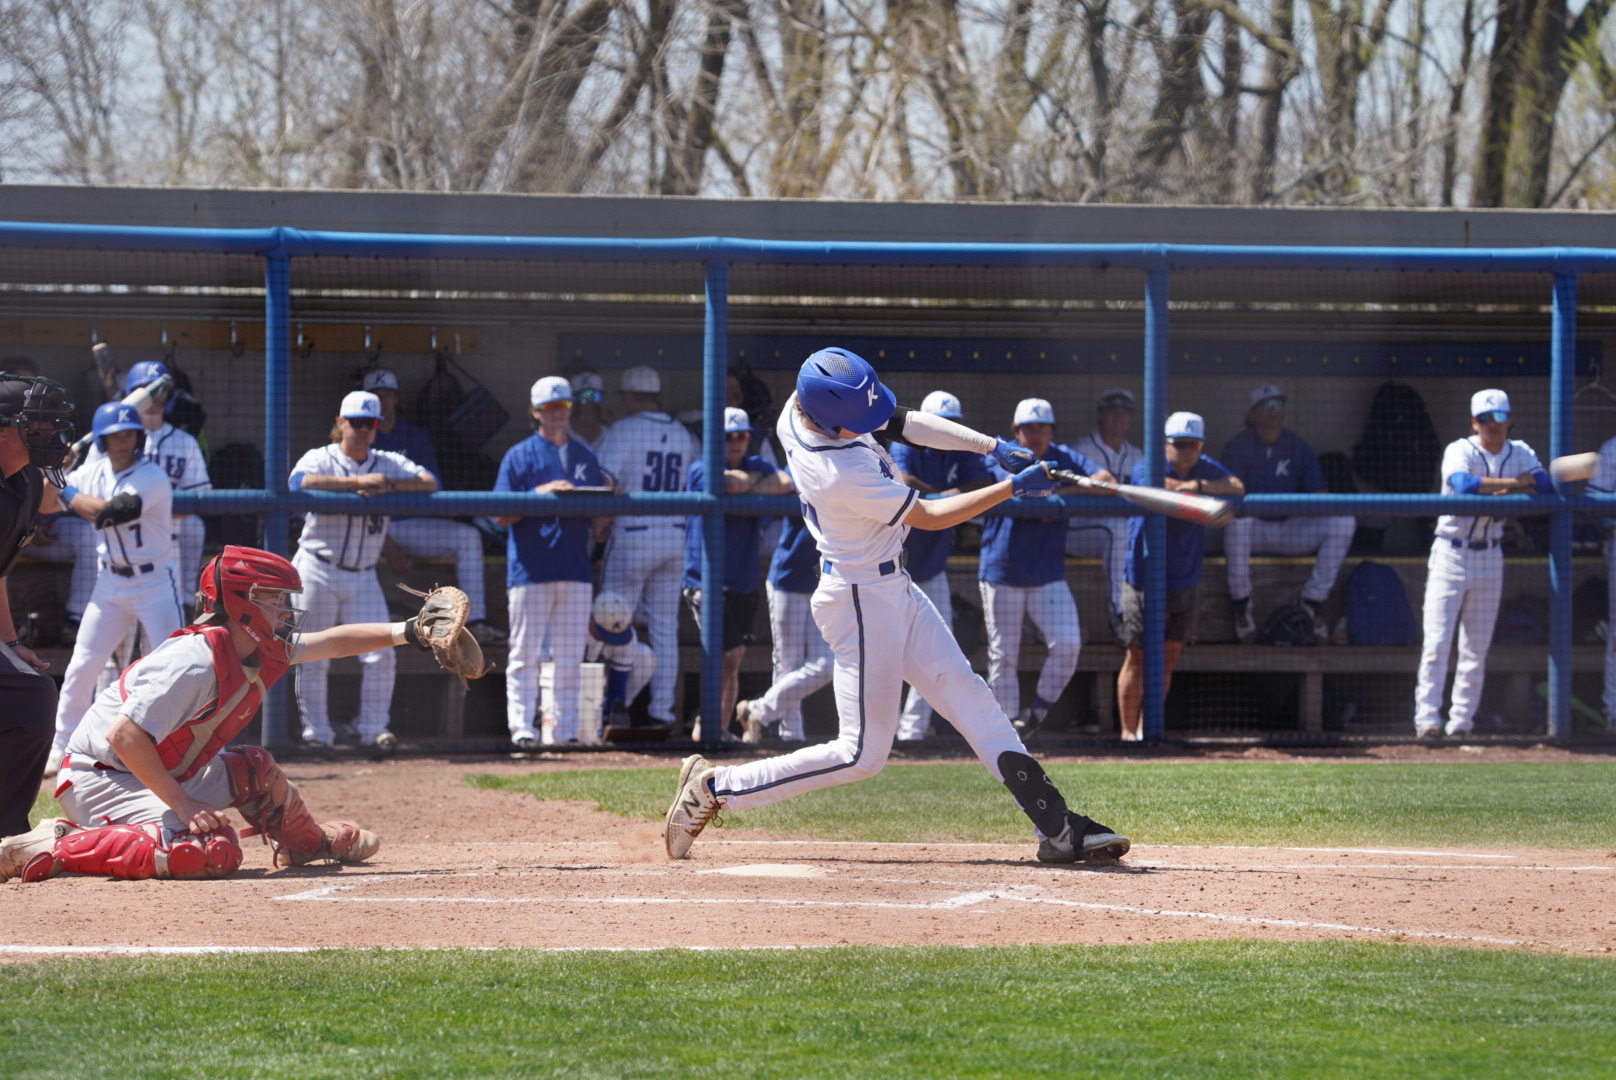 KCC BASEBALL CLAIMS NO.1 SEED FOR REGIONAL